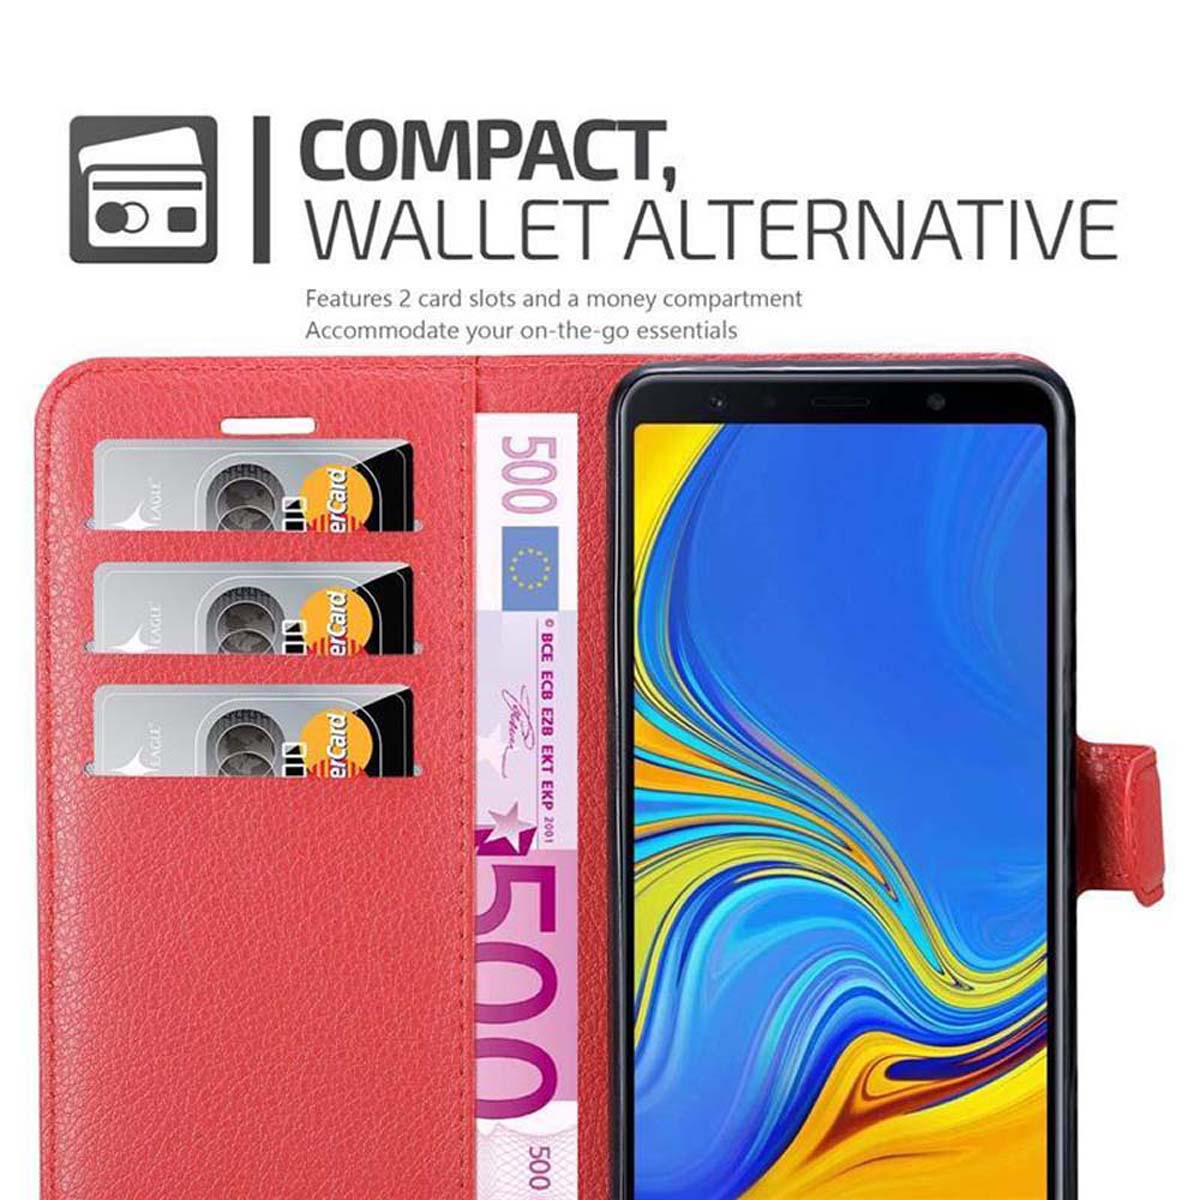 Samsung, 2018, ROT CADORABO Galaxy Standfunktion, A7 Book Bookcover, KARMIN Hülle